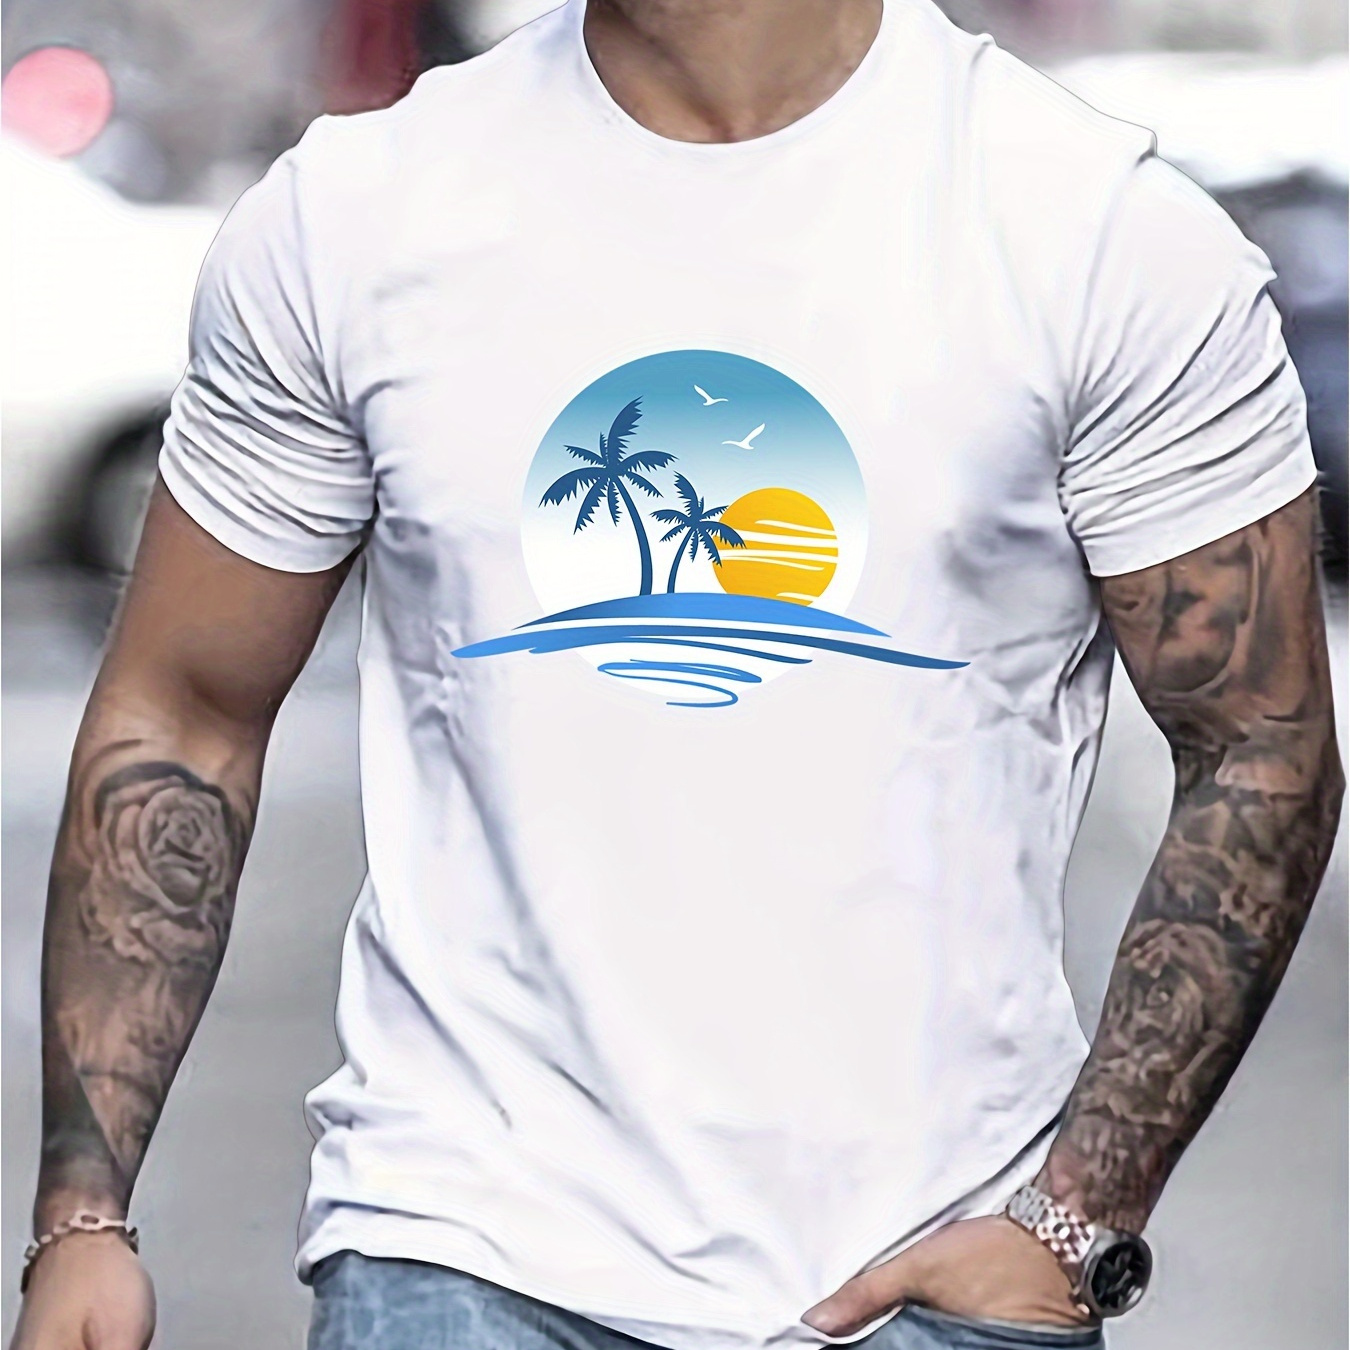 

Palm Trees Print Tee Shirt, Tees For Men, Casual Short Sleeve T-shirt For Summer